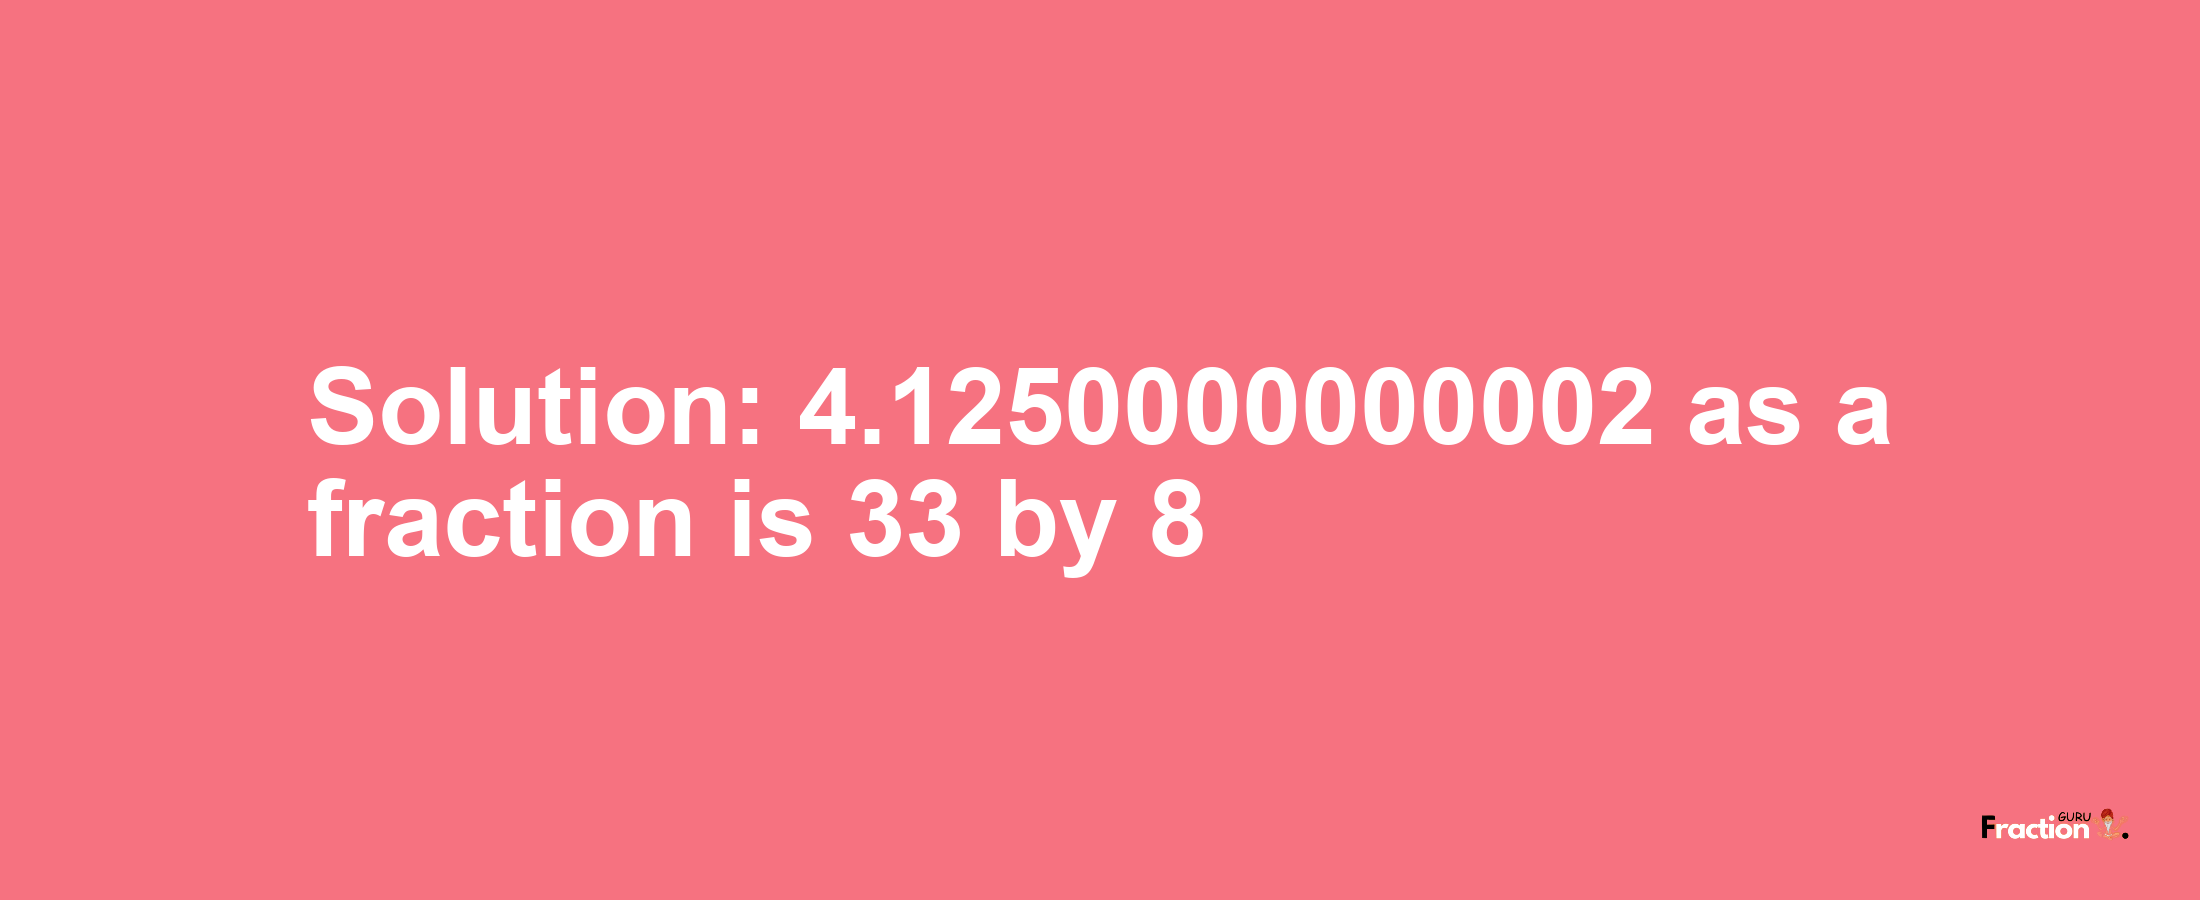 Solution:4.1250000000002 as a fraction is 33/8